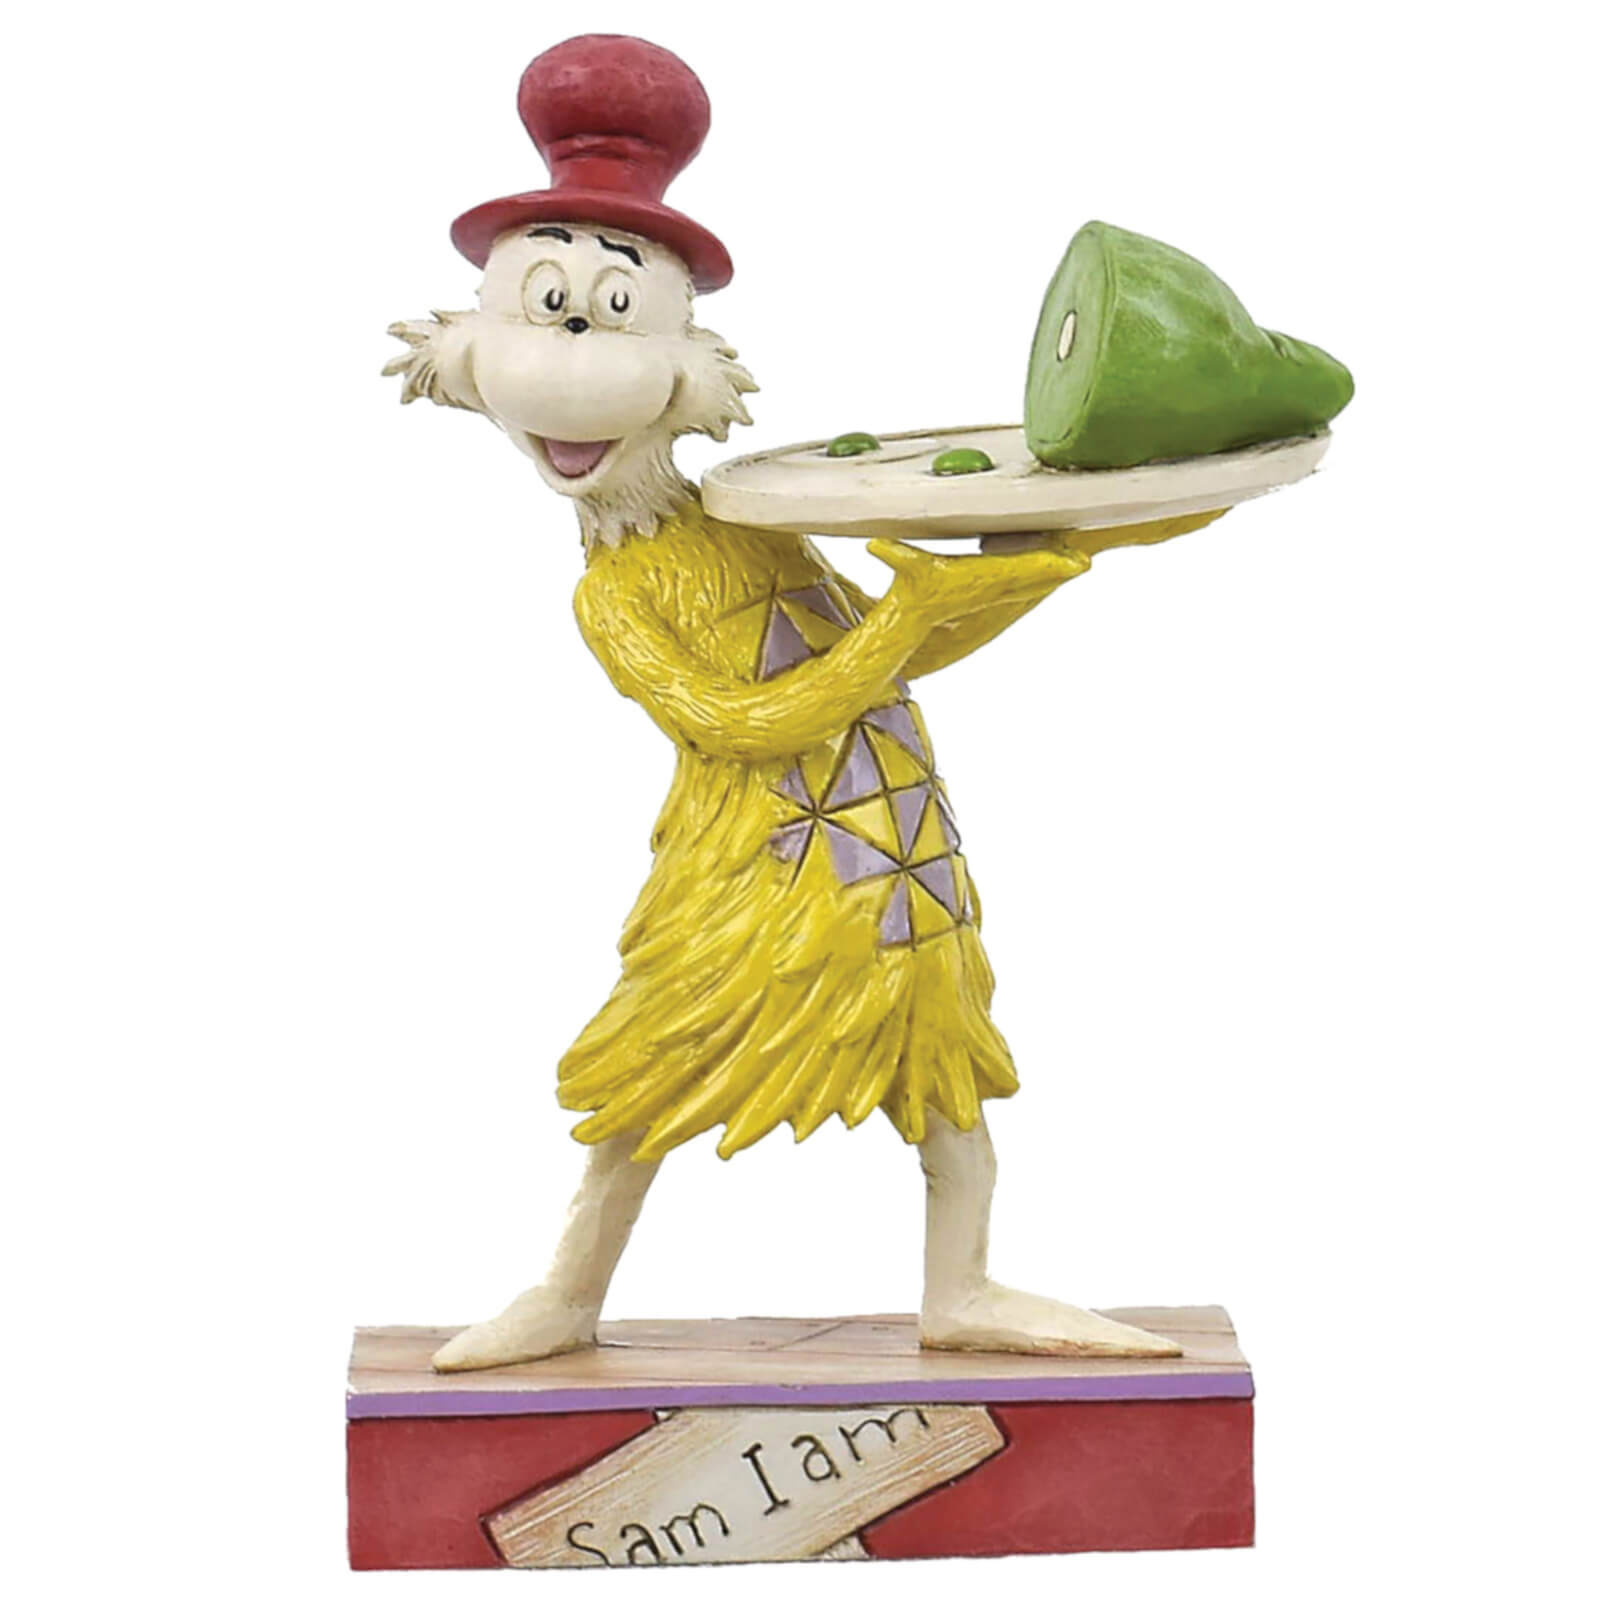 Enesco Dr Seuss by Jim Shore Sam Holding Plate of Green Eggs and Ham